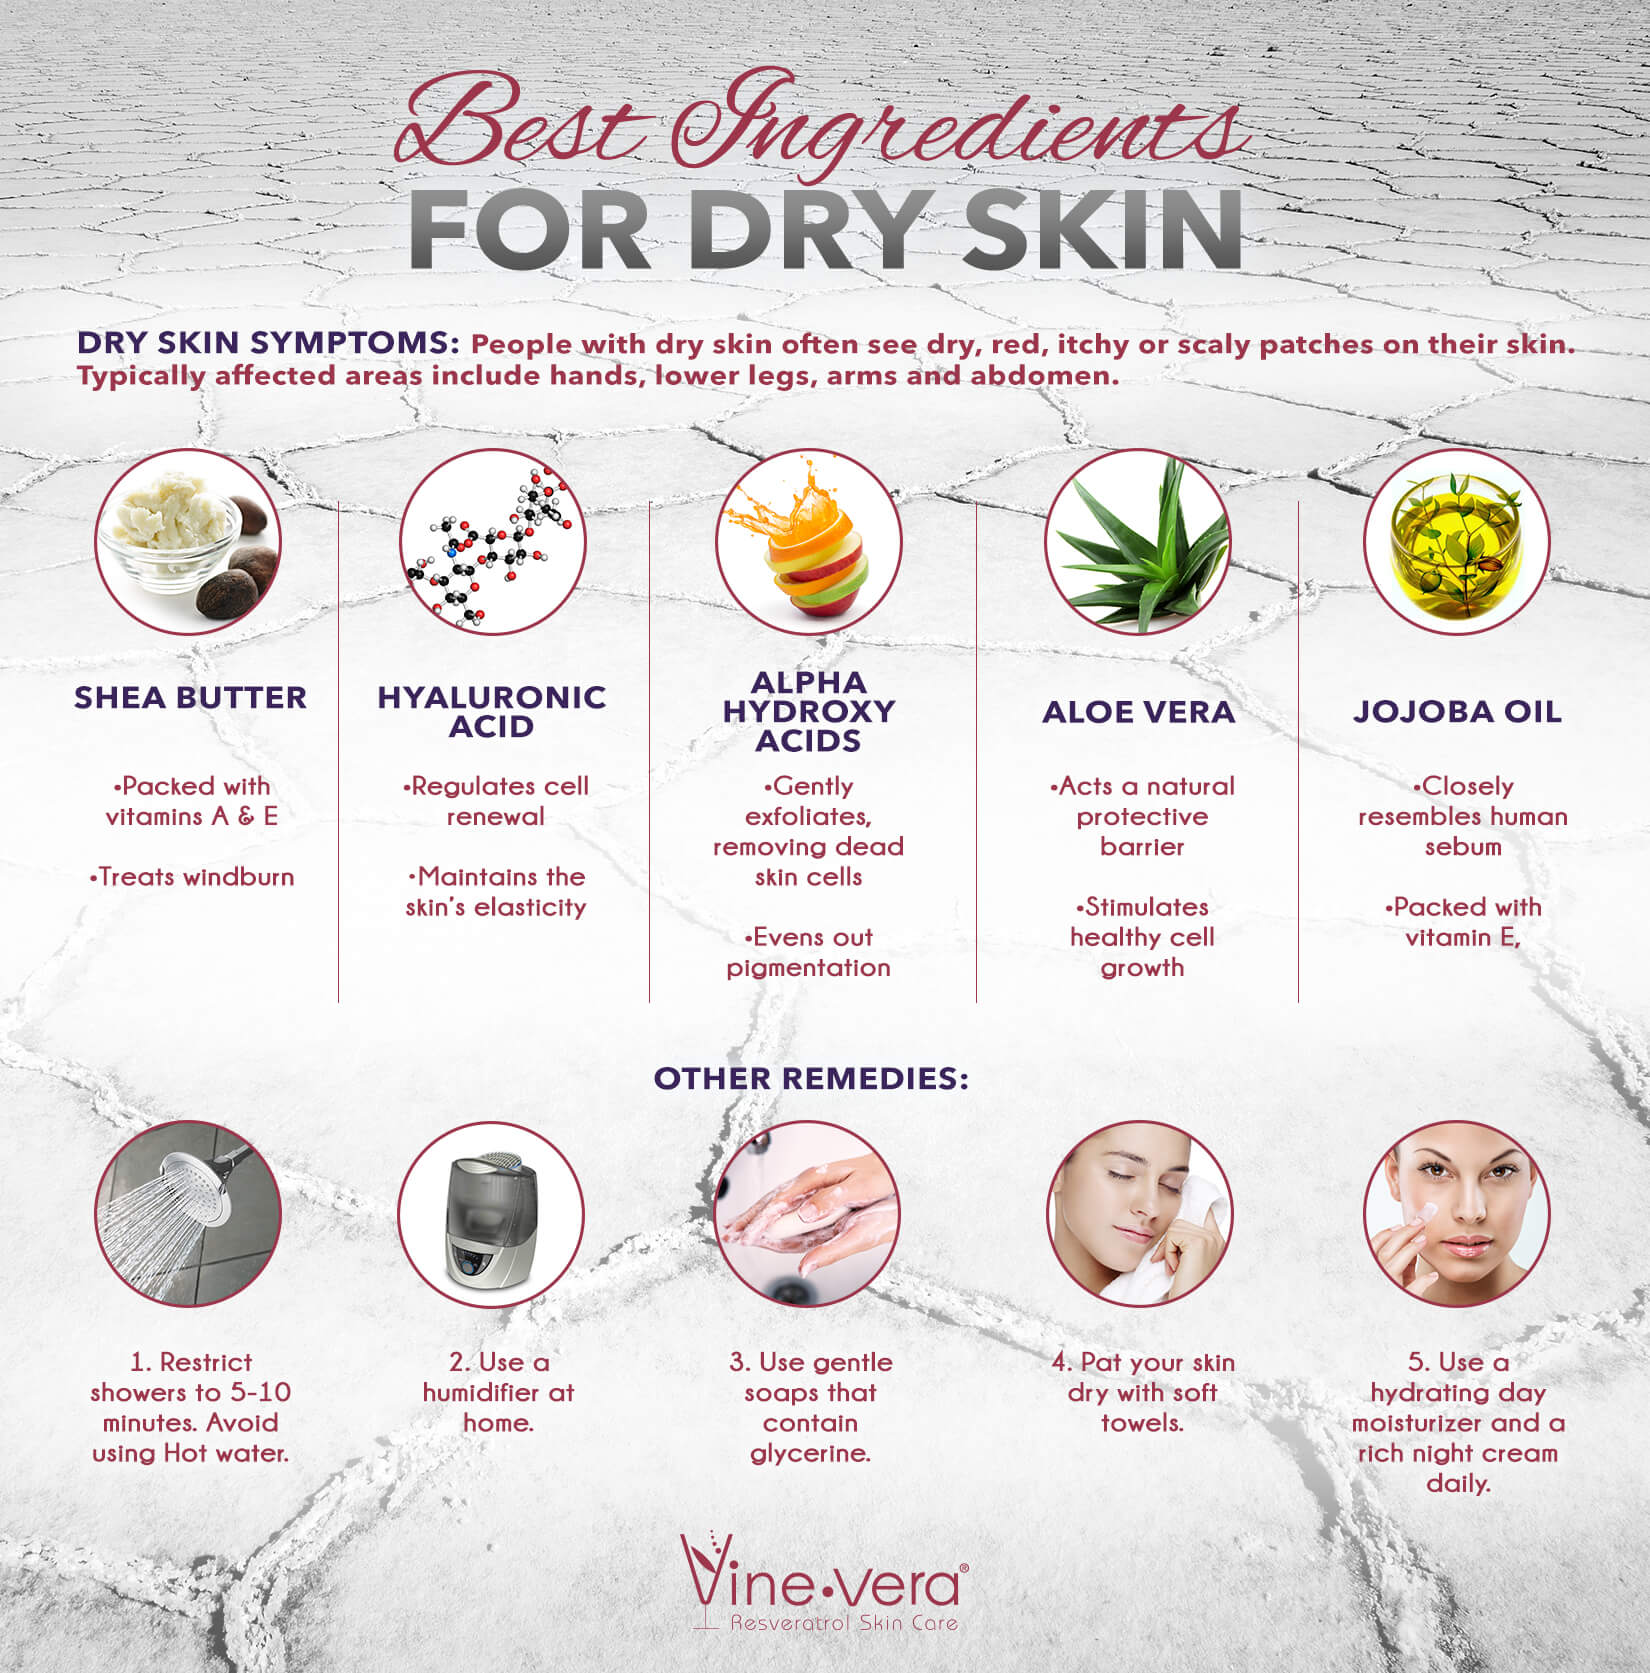 Infographic on best ingredients for dry skin